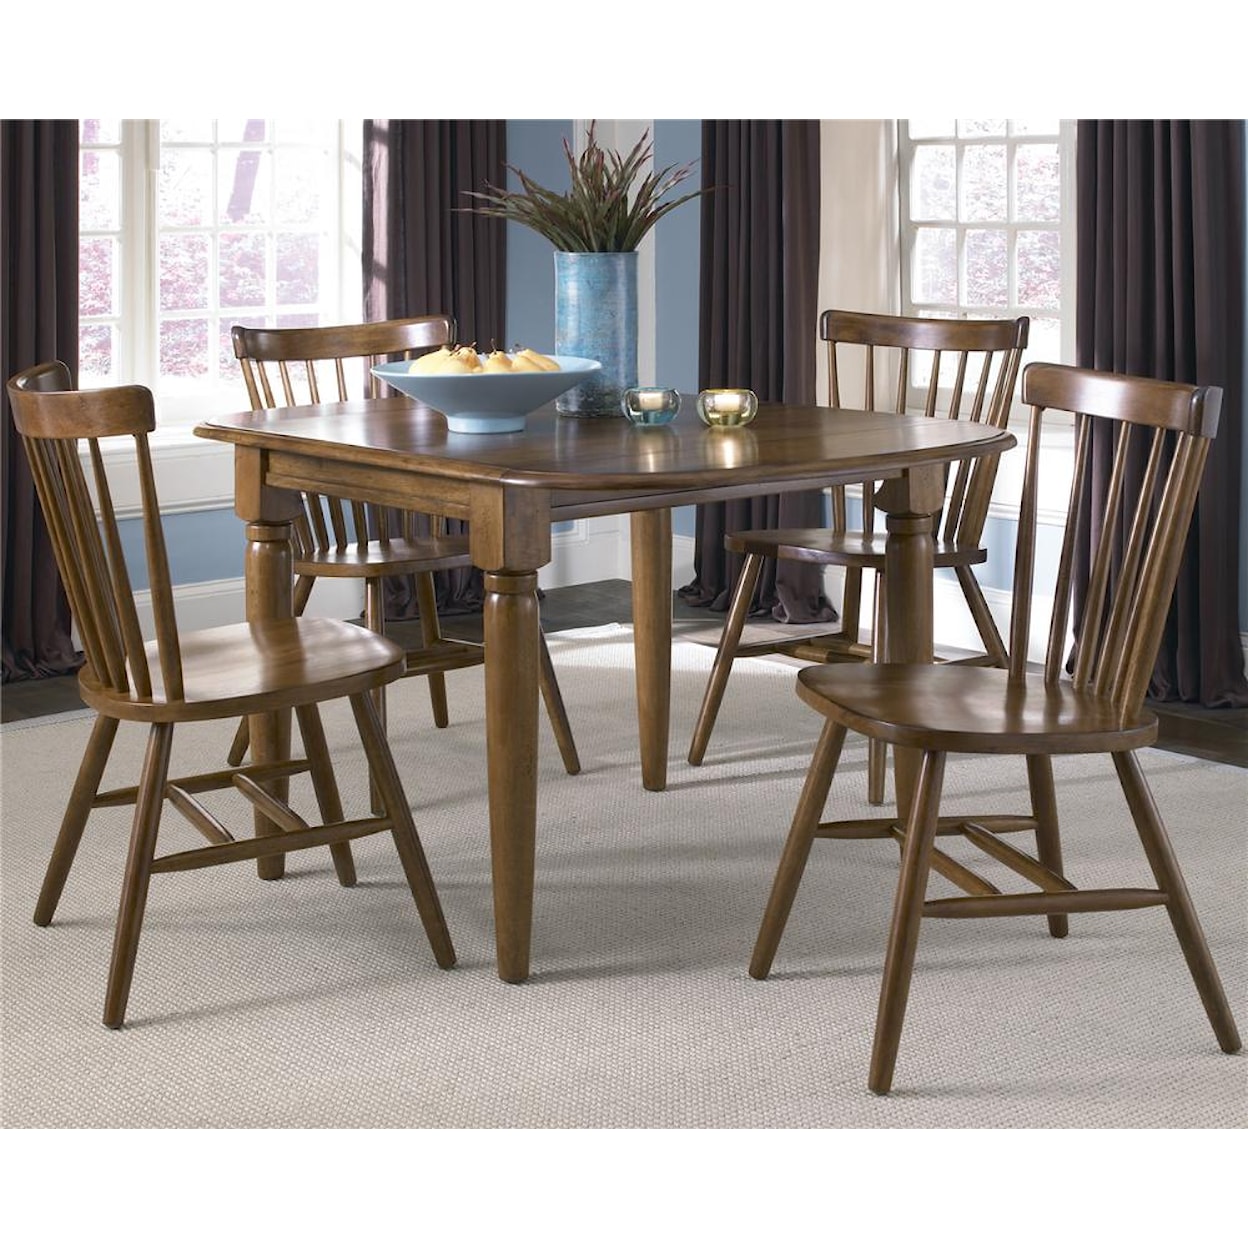 Liberty Furniture Creations II Dinette Table